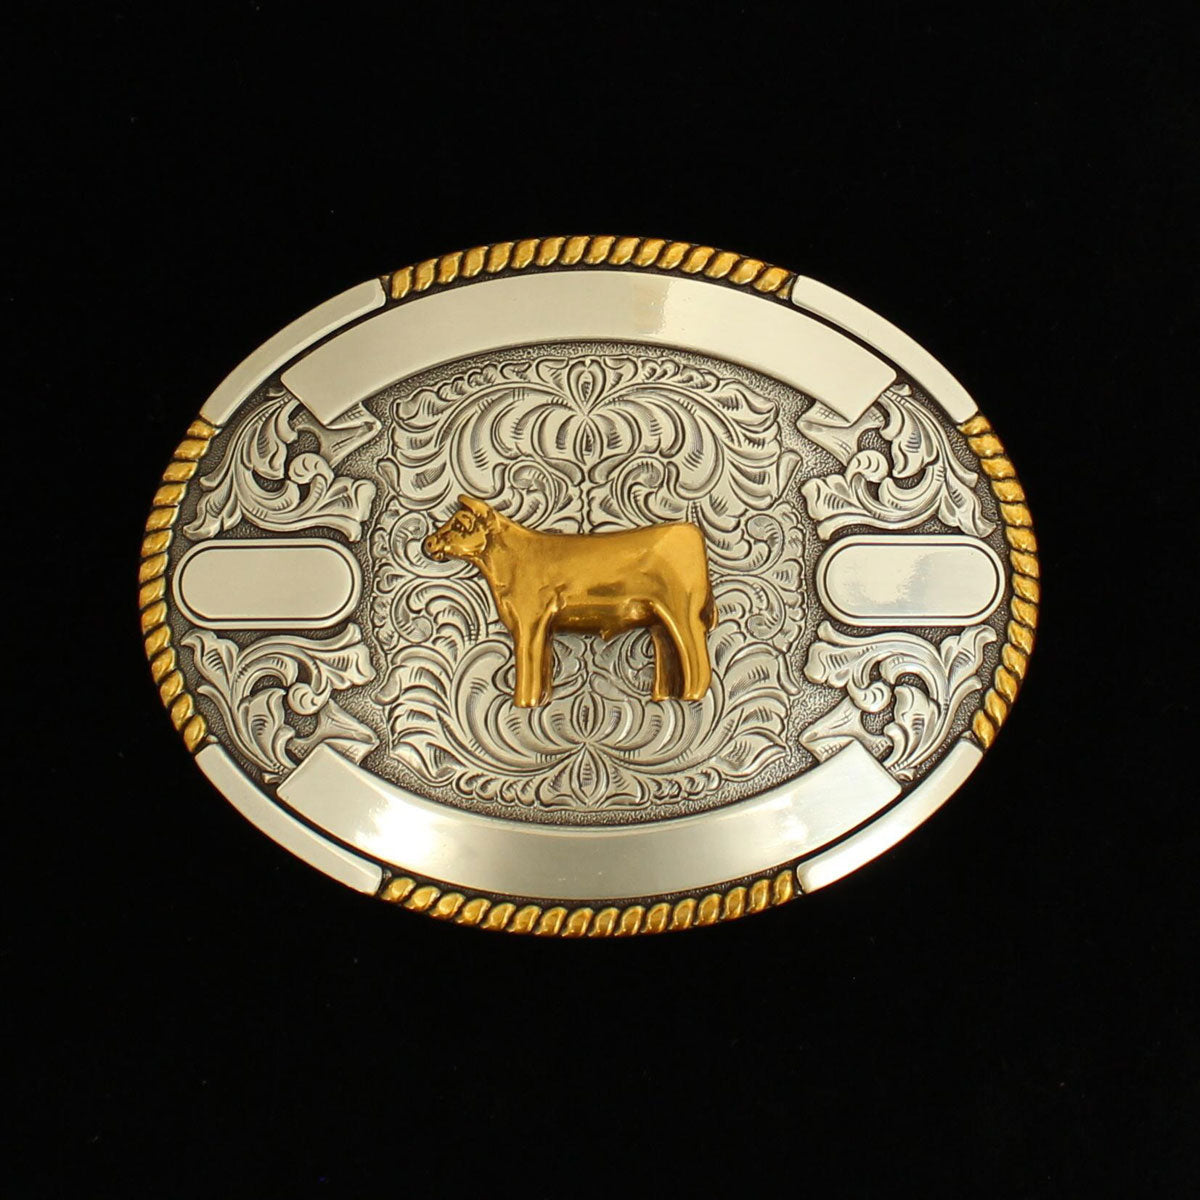 SHOW COW OVAL BELT BUCKLE